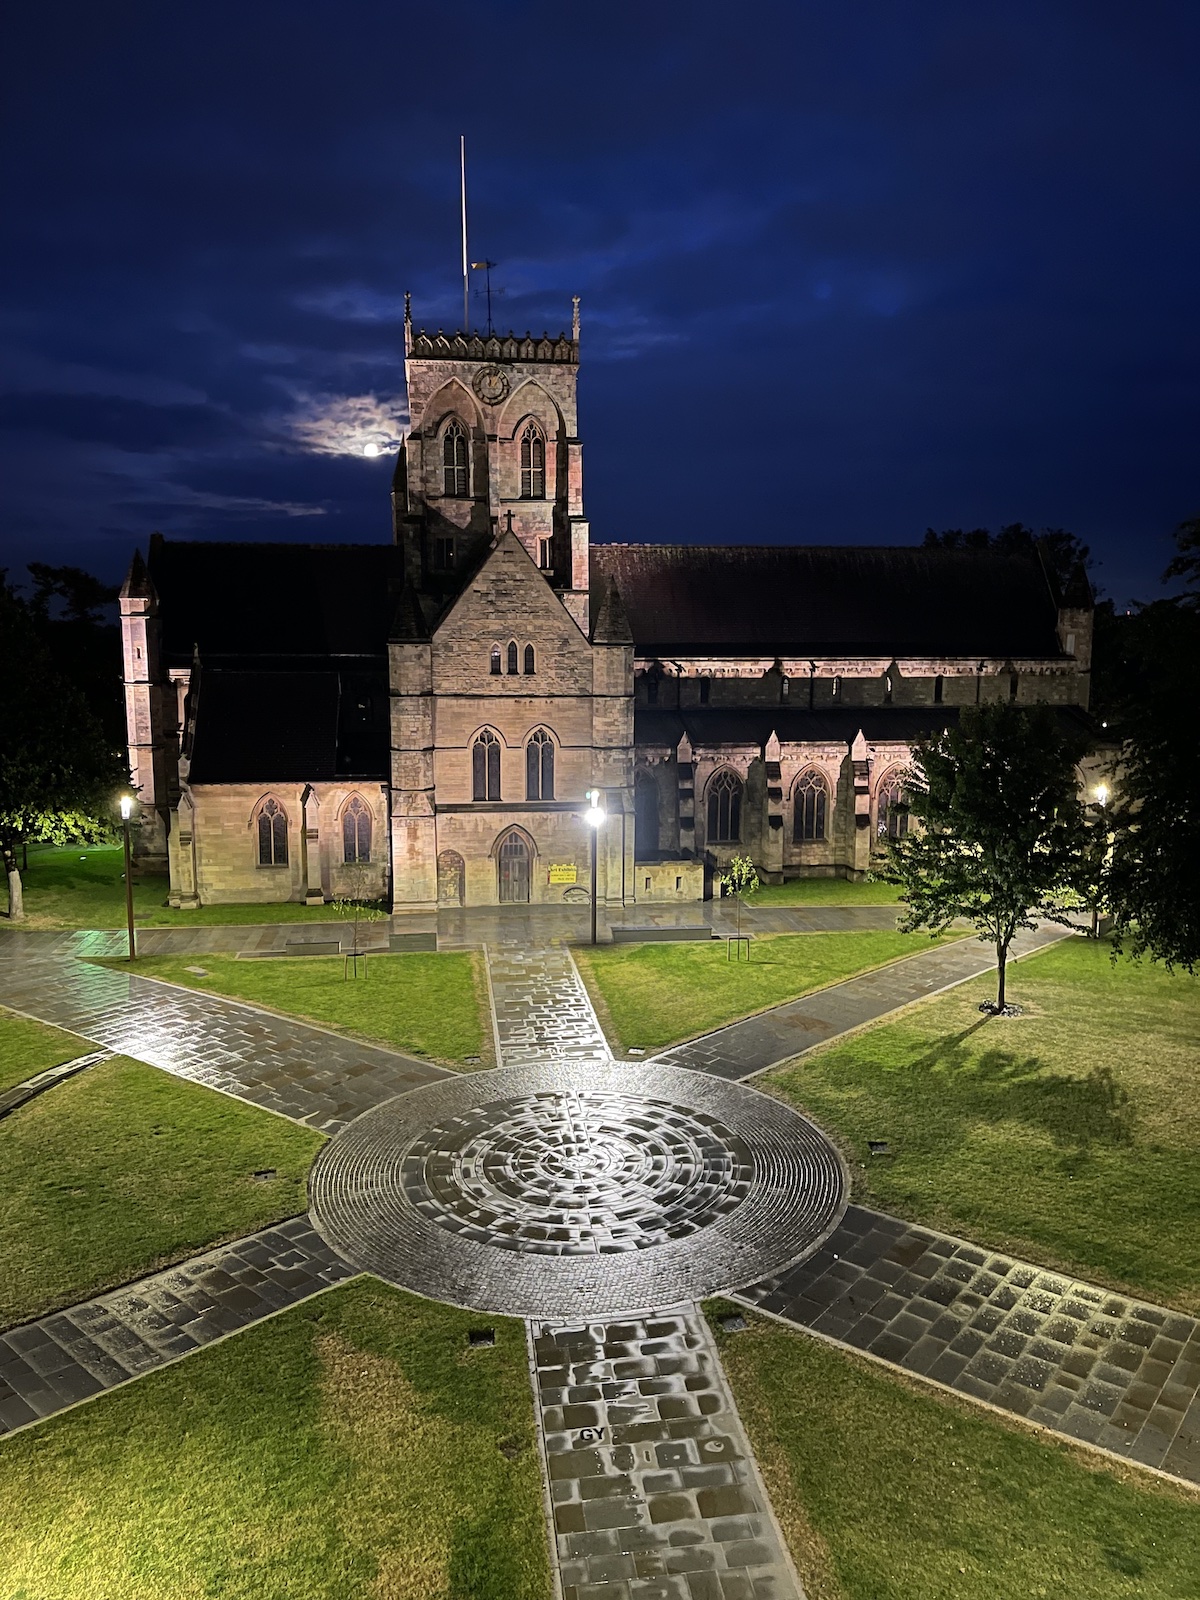 Grimsby Minster at night